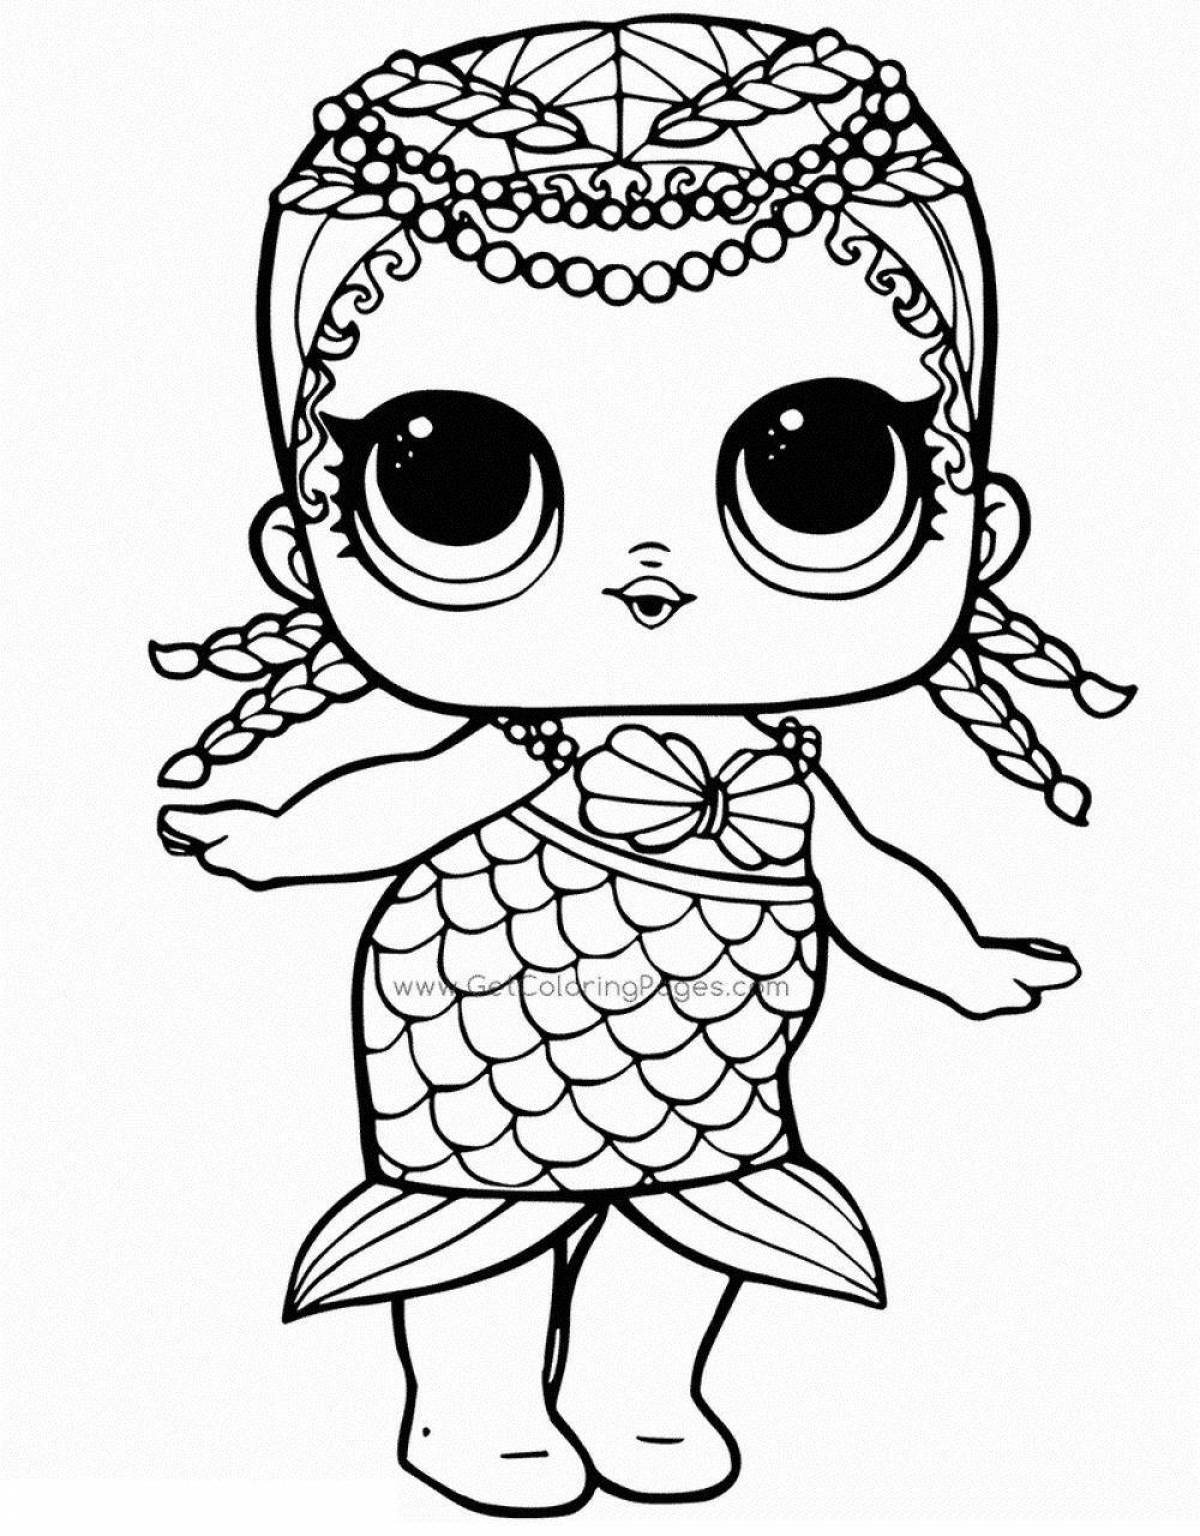 Color-festive coloring page lol doll